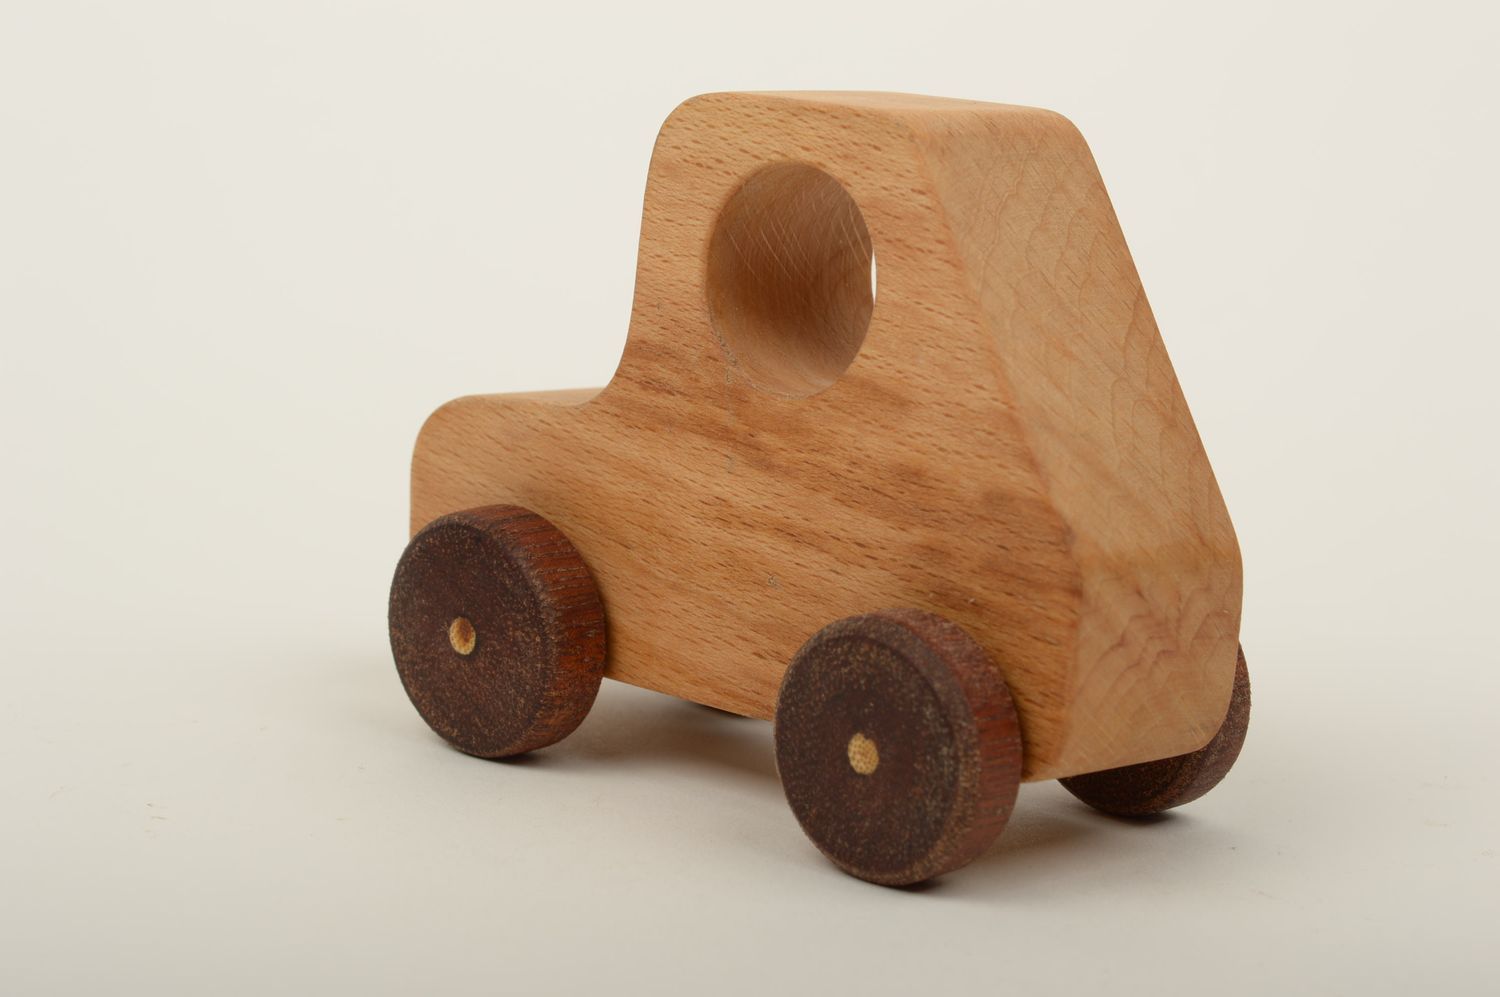 Handmade wooden toy wheeled toy best toys for kids wood craft gifts for kids photo 3